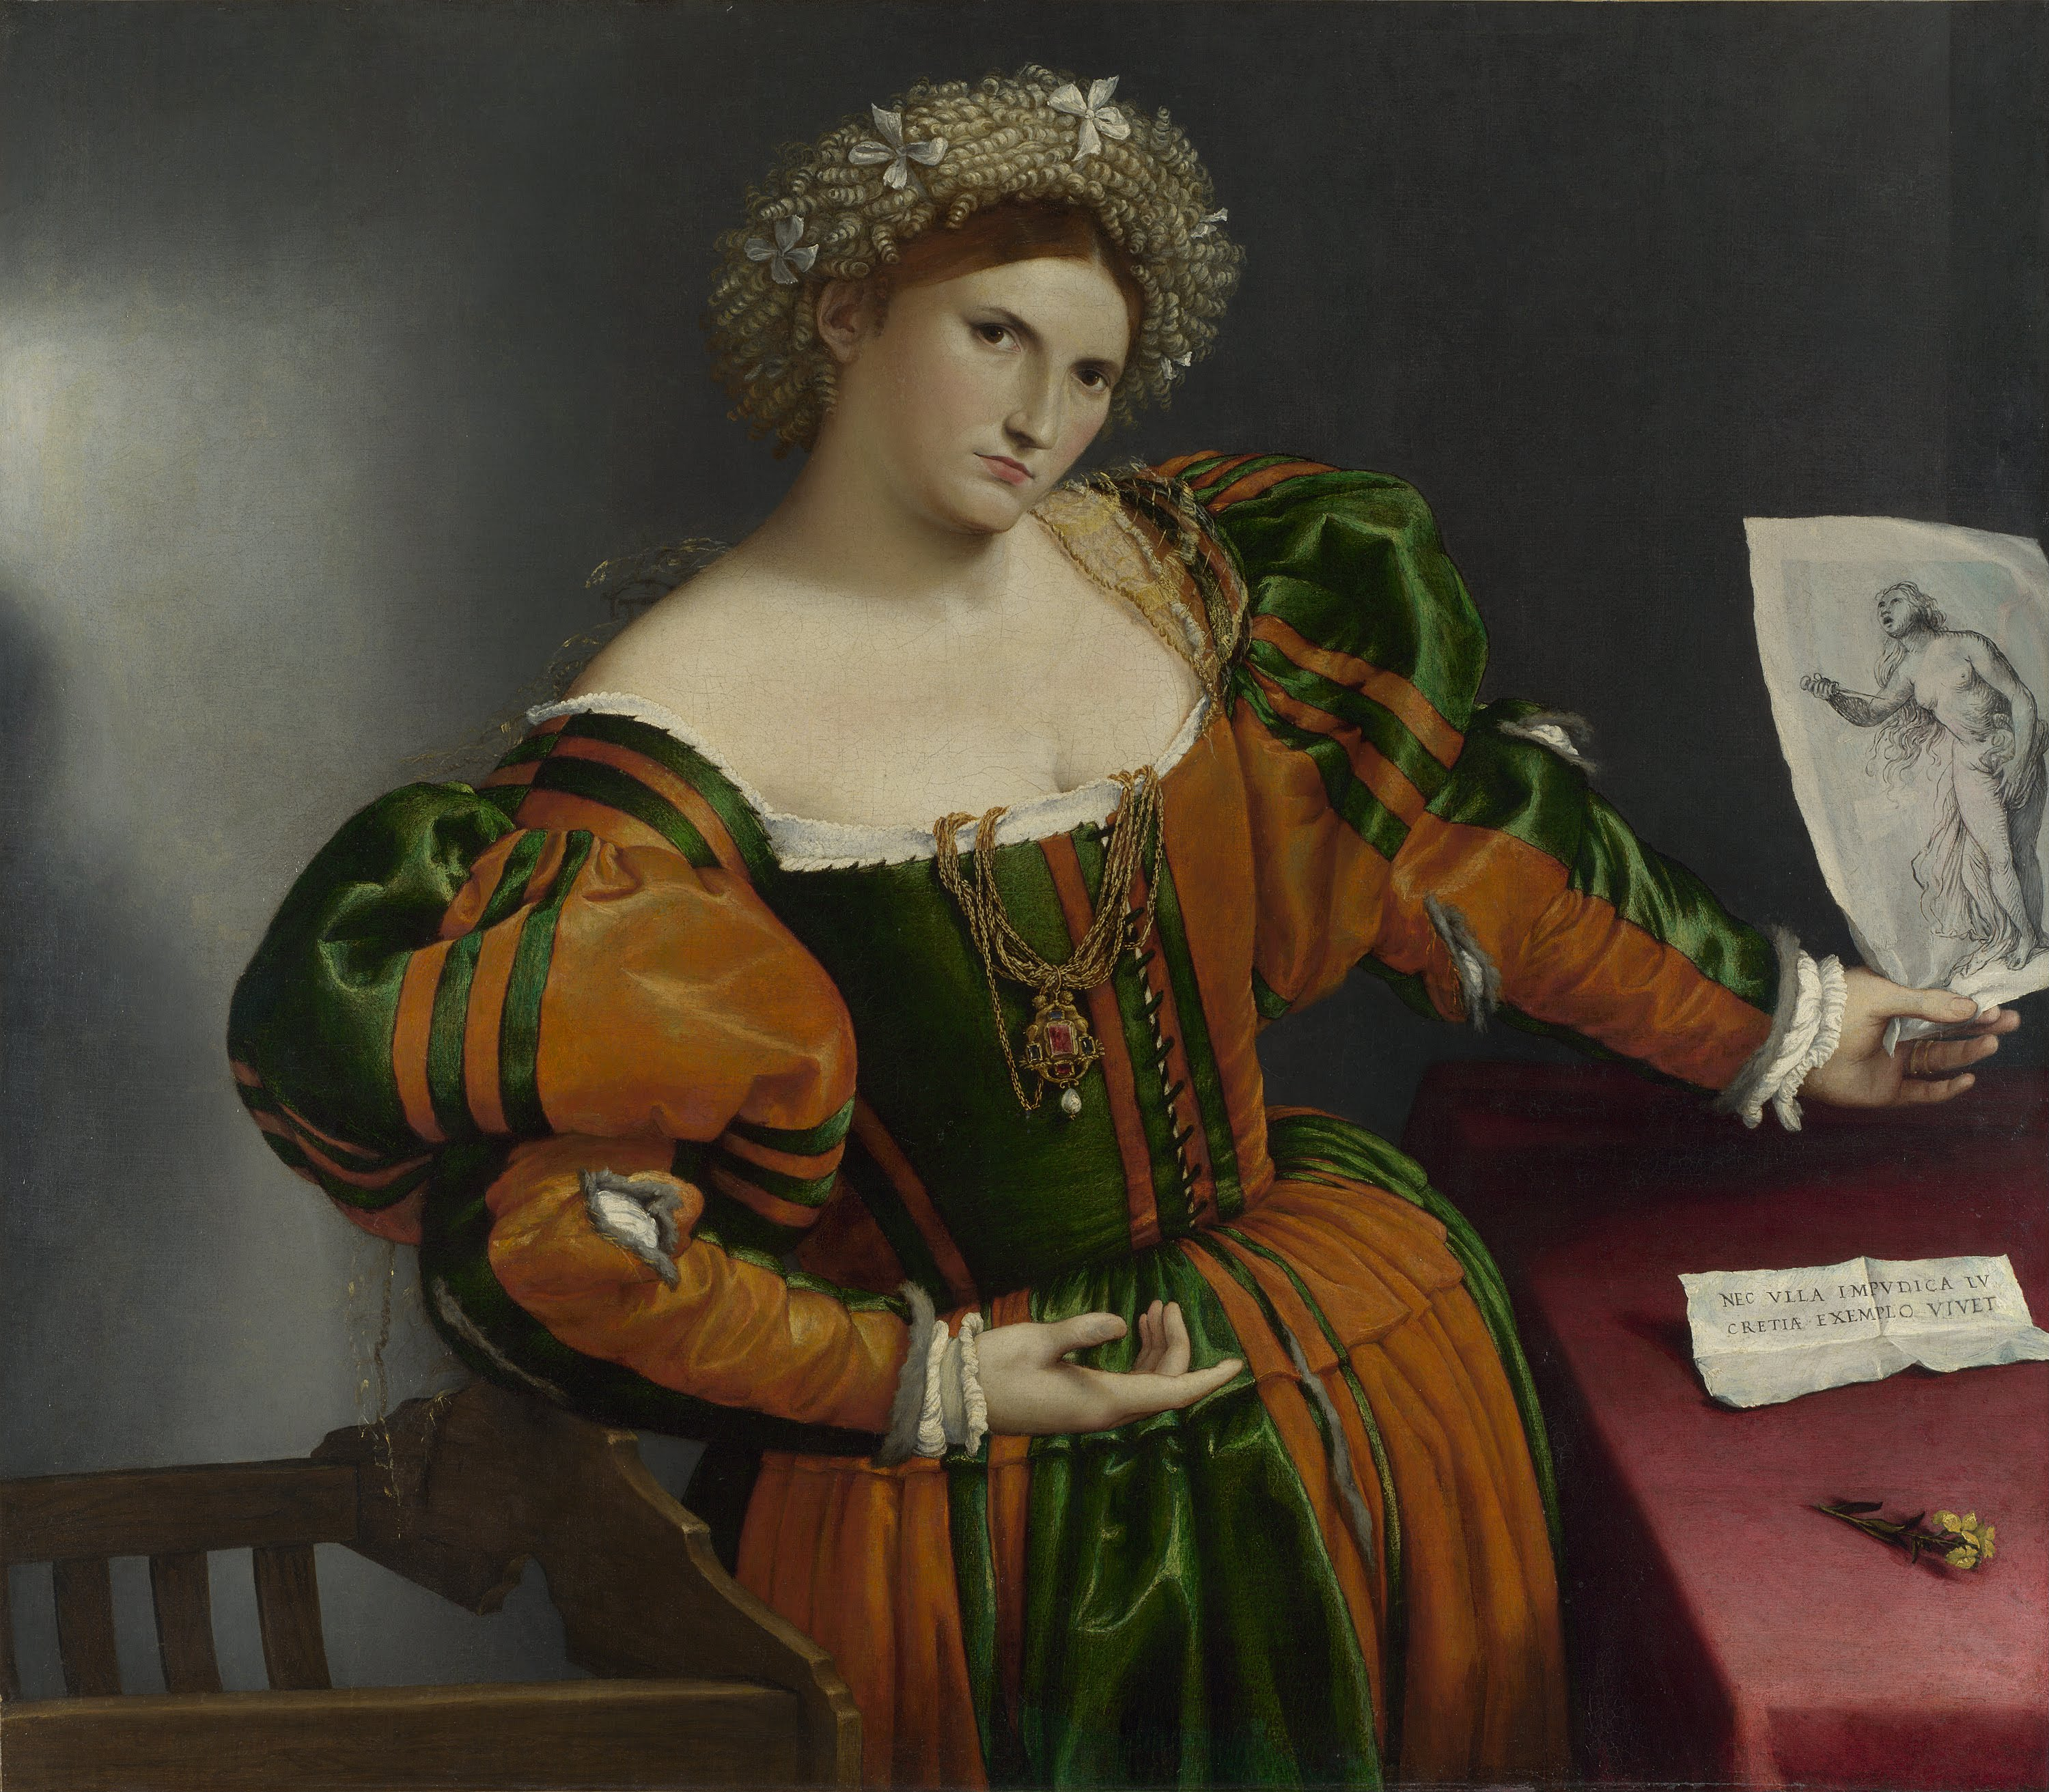 Portrait of a Woman inspired by Lucretia by Lorenzo Lotto - about 1530-2 - 96.5 x 110.6 cm National Gallery